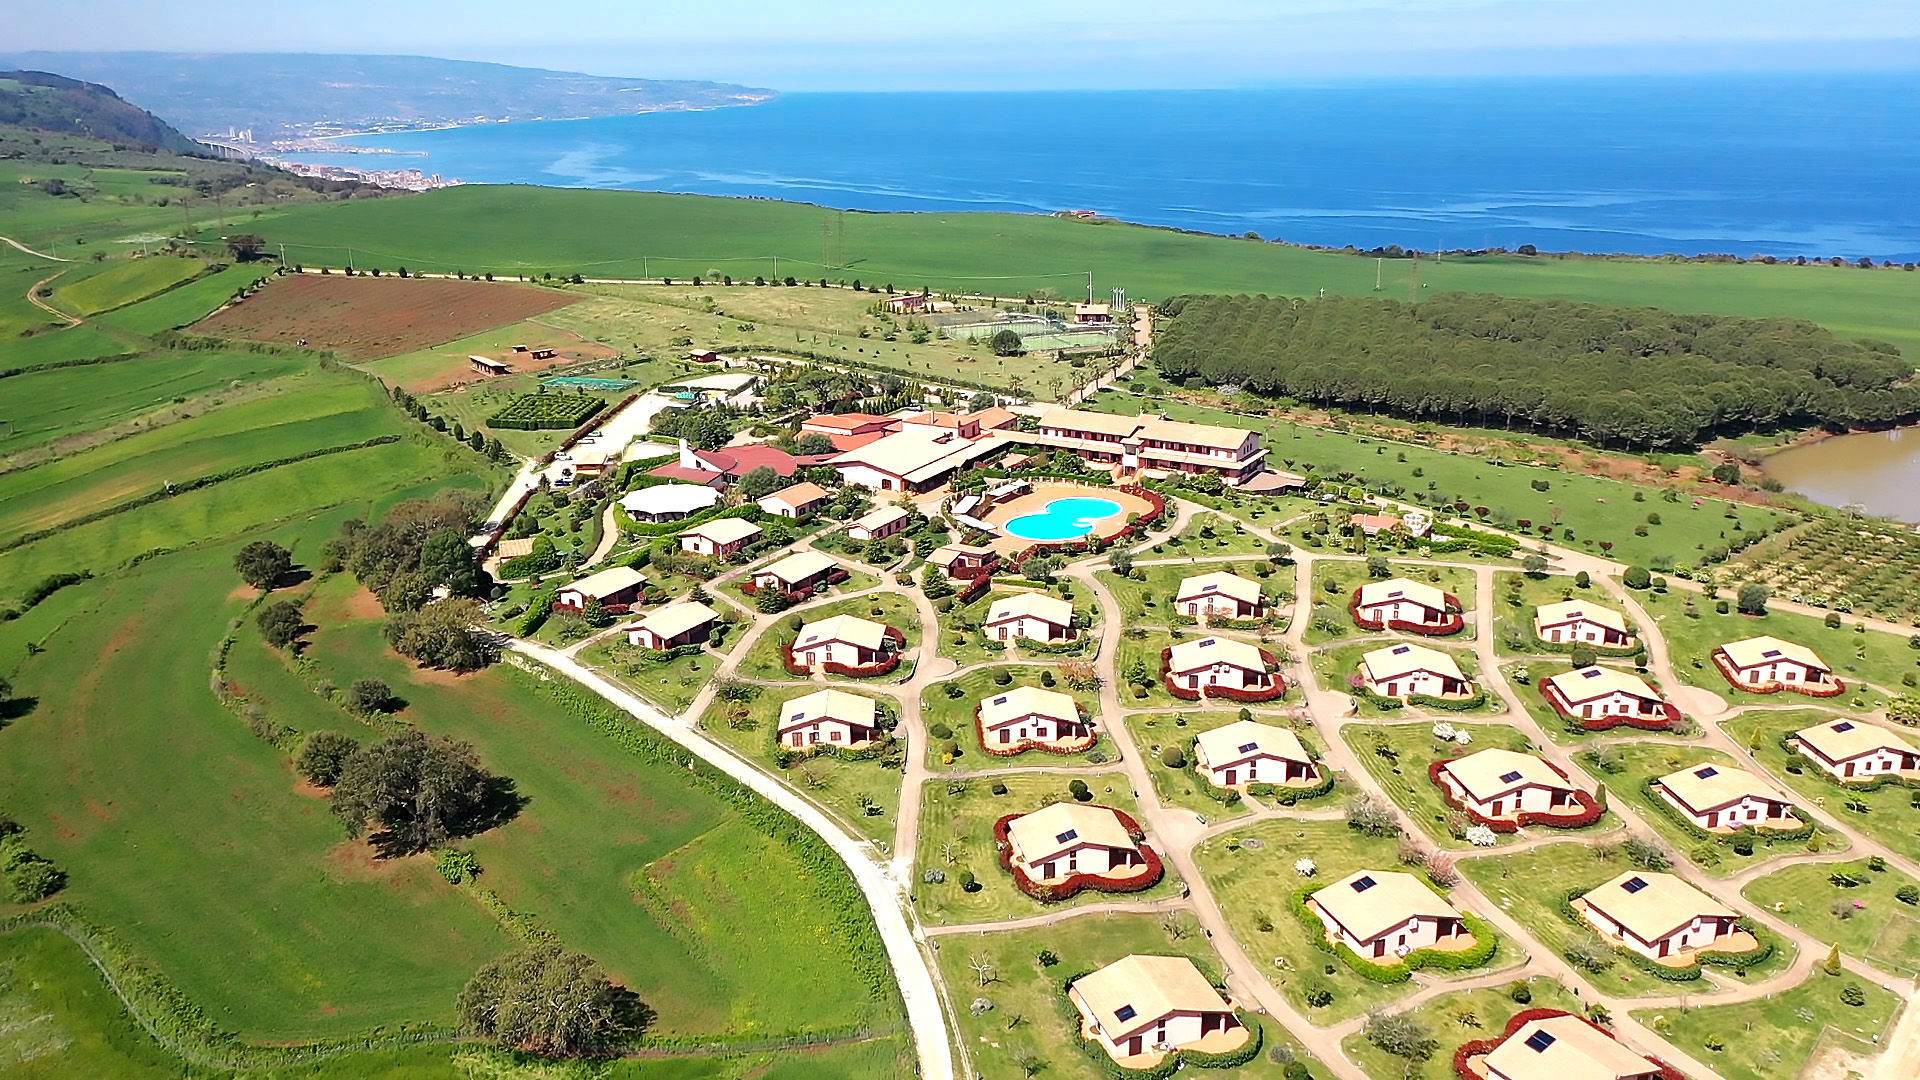 Popilia Country Resort prepares for reopening and chooses Blastness systems and services